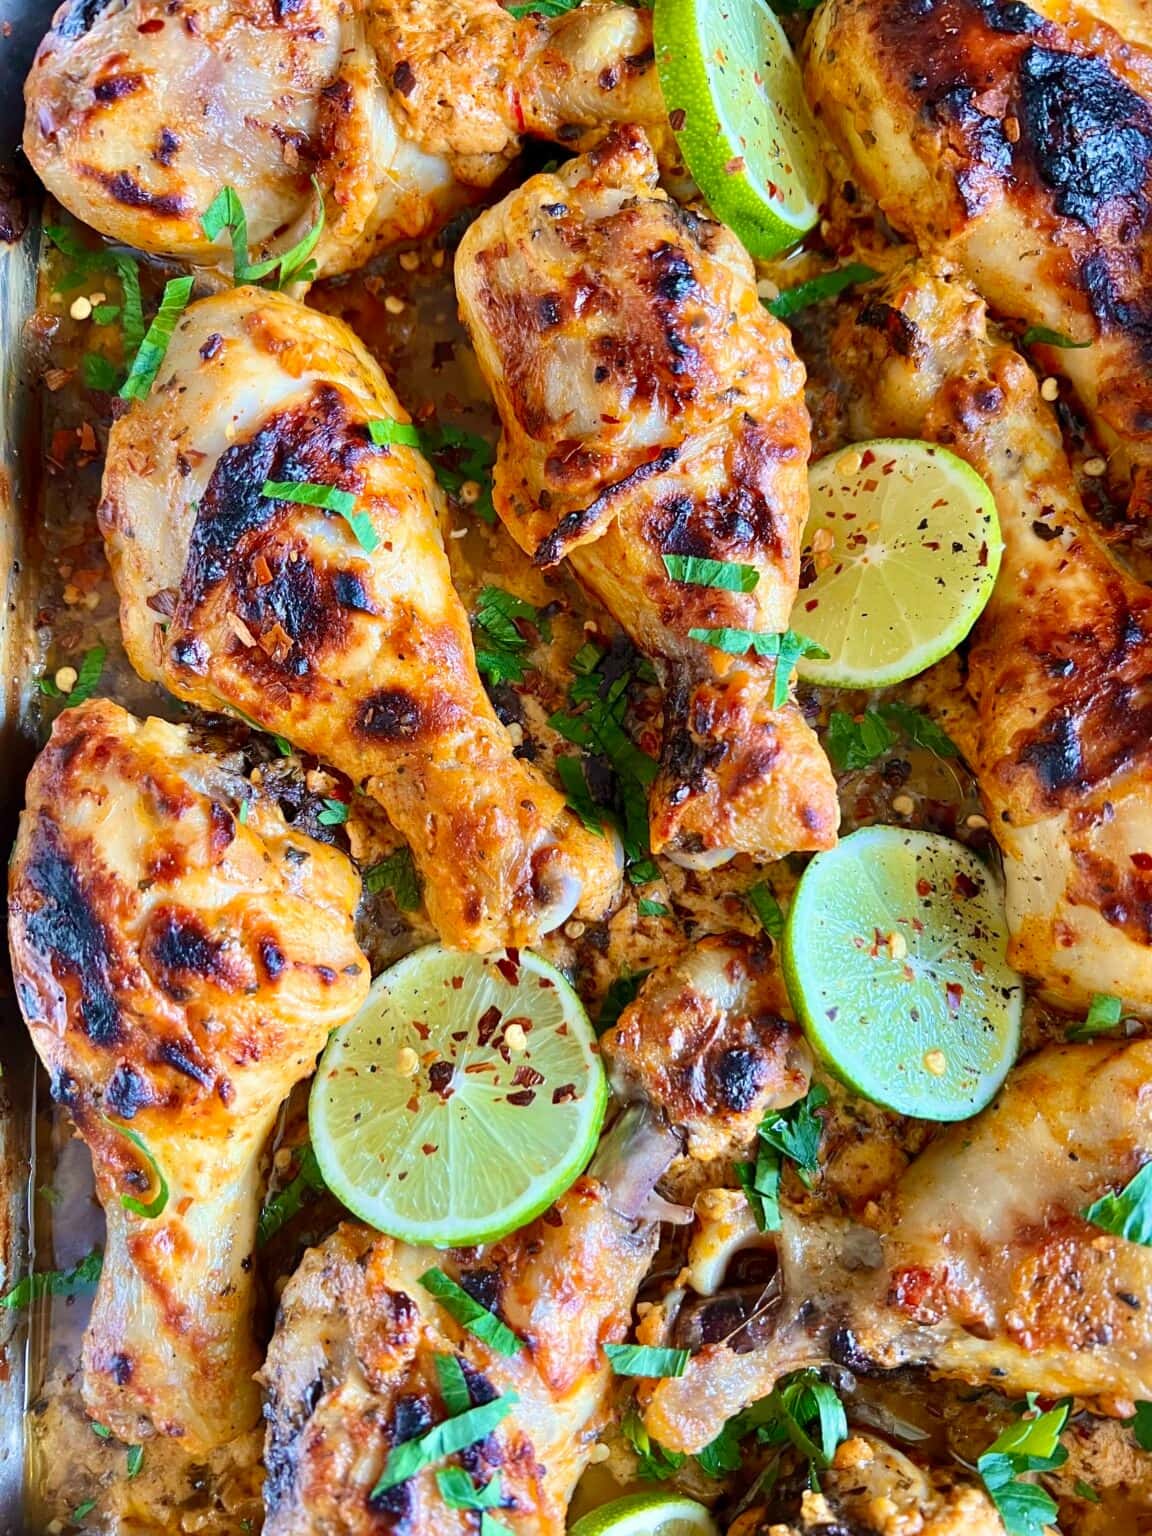 Seasoned chicken legs garnished with lime slices and chopped parsley.